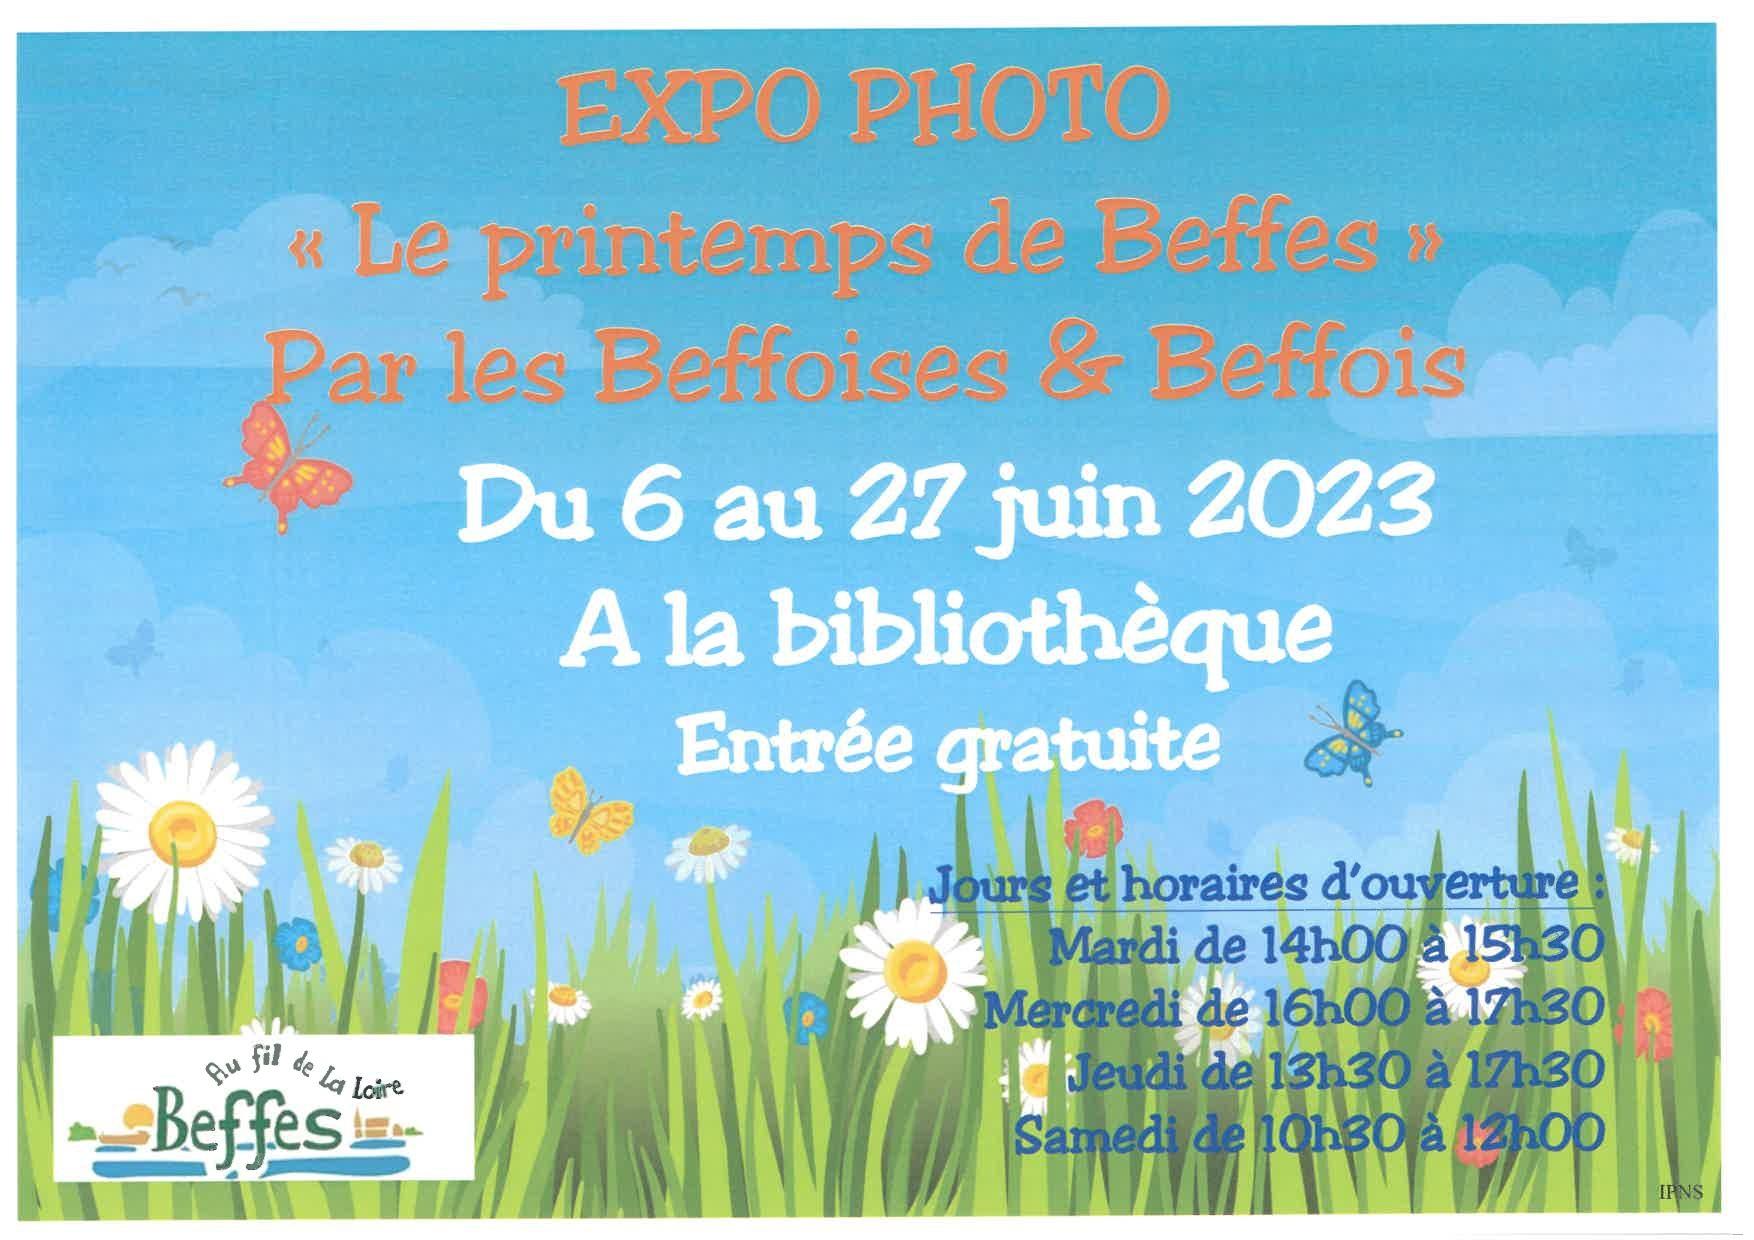 Expo photo affiche beffes